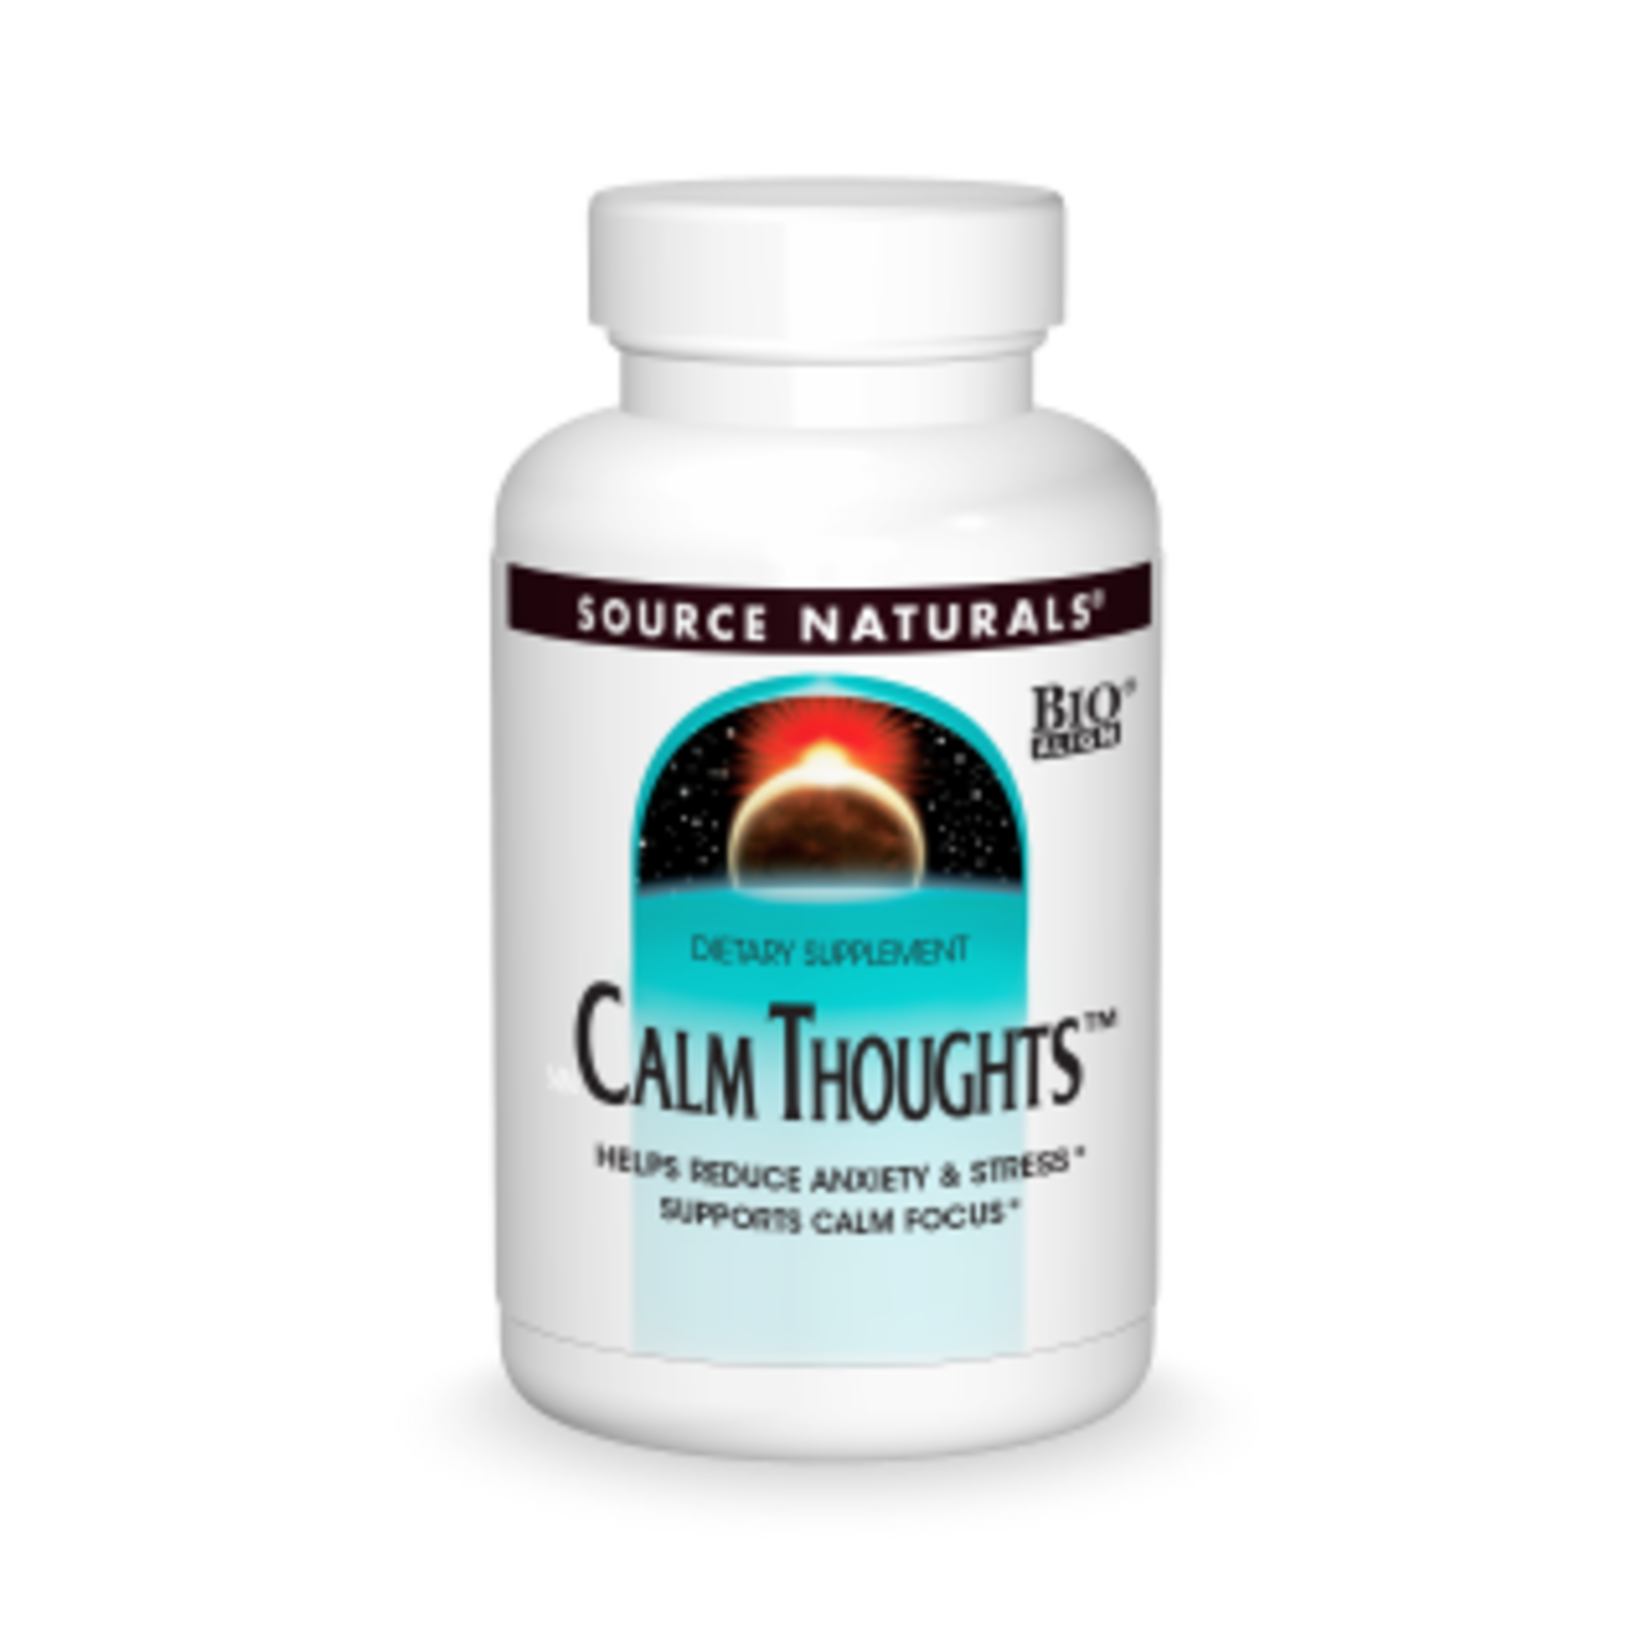 Source Naturals Source Naturals - Calm Thoughts - 45 Tablets